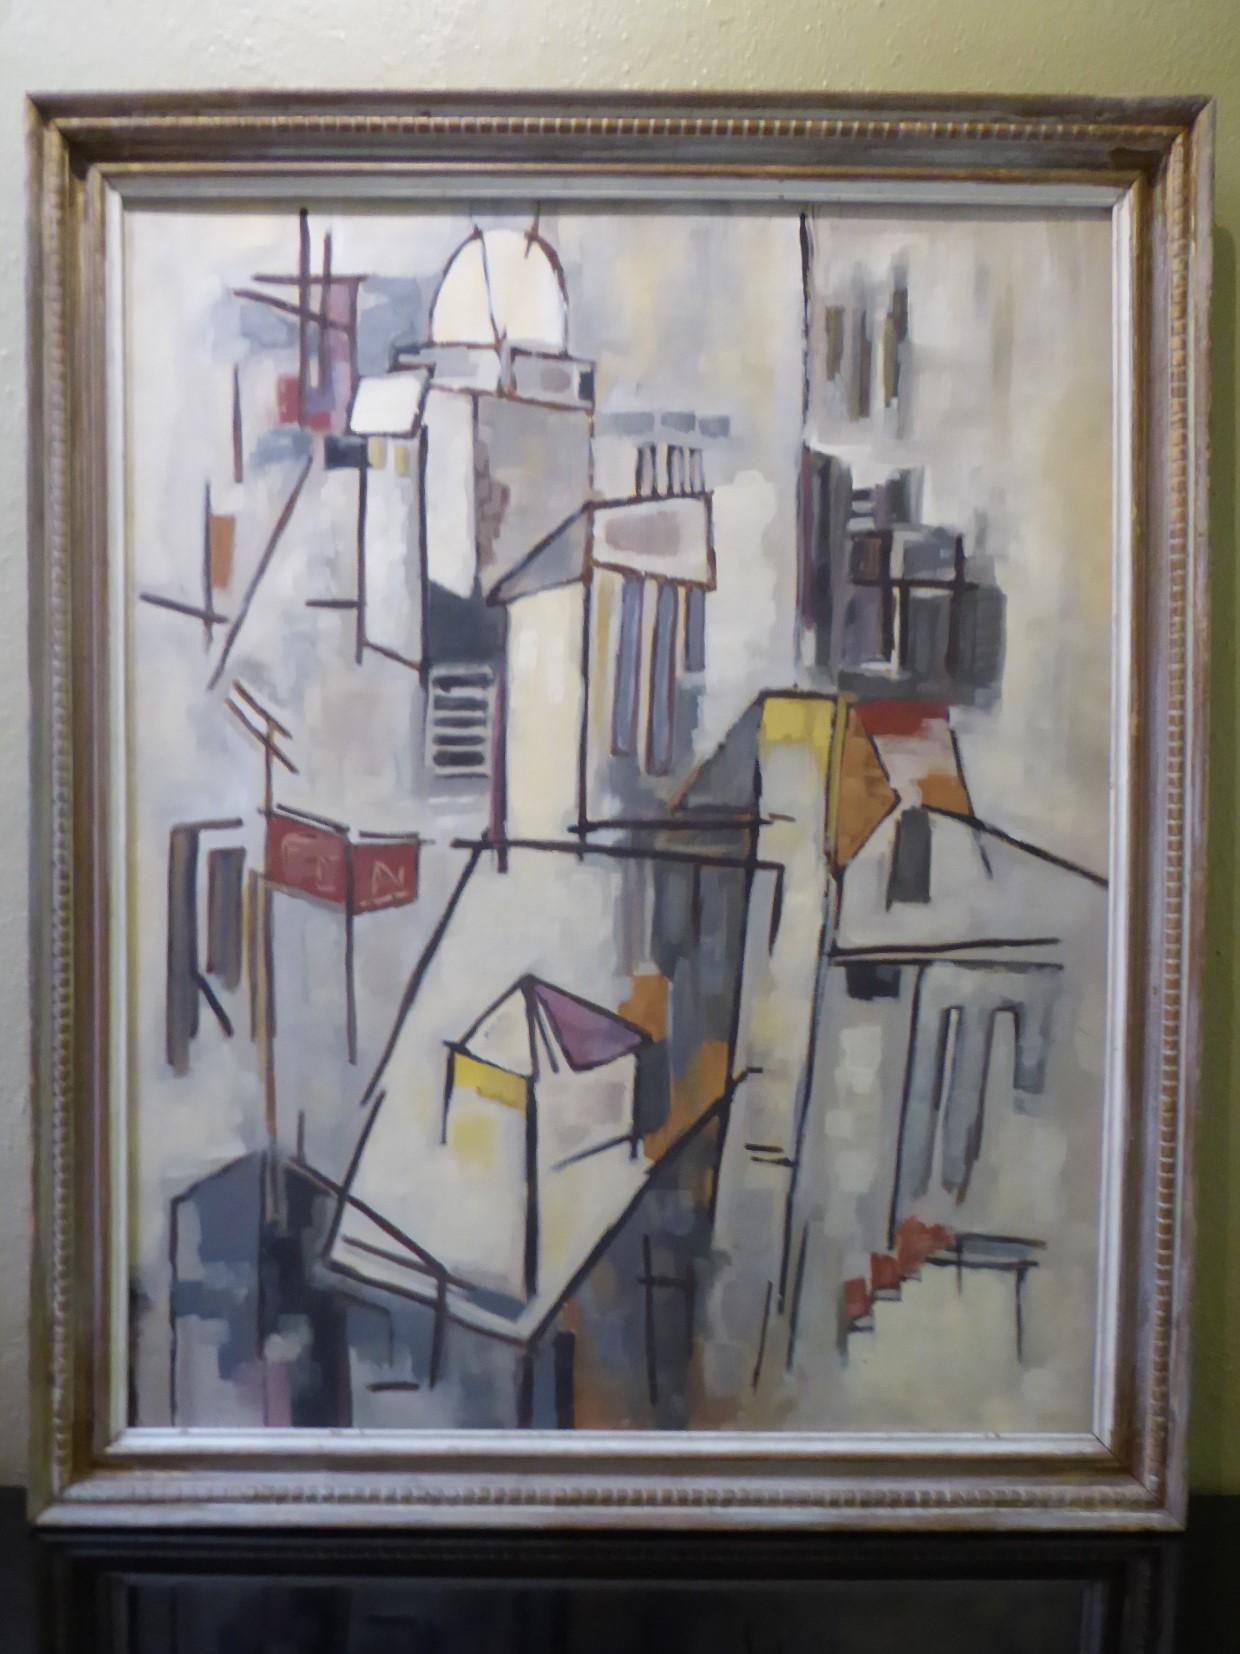 Mid Century Modern exceptional oil on board Cubist Cityscape painting from the 1950s. Color palette of mostly shades of gray with brick red, yellow, white and black and dark brown outlines. Original carved wood frame, wear consistent with age and